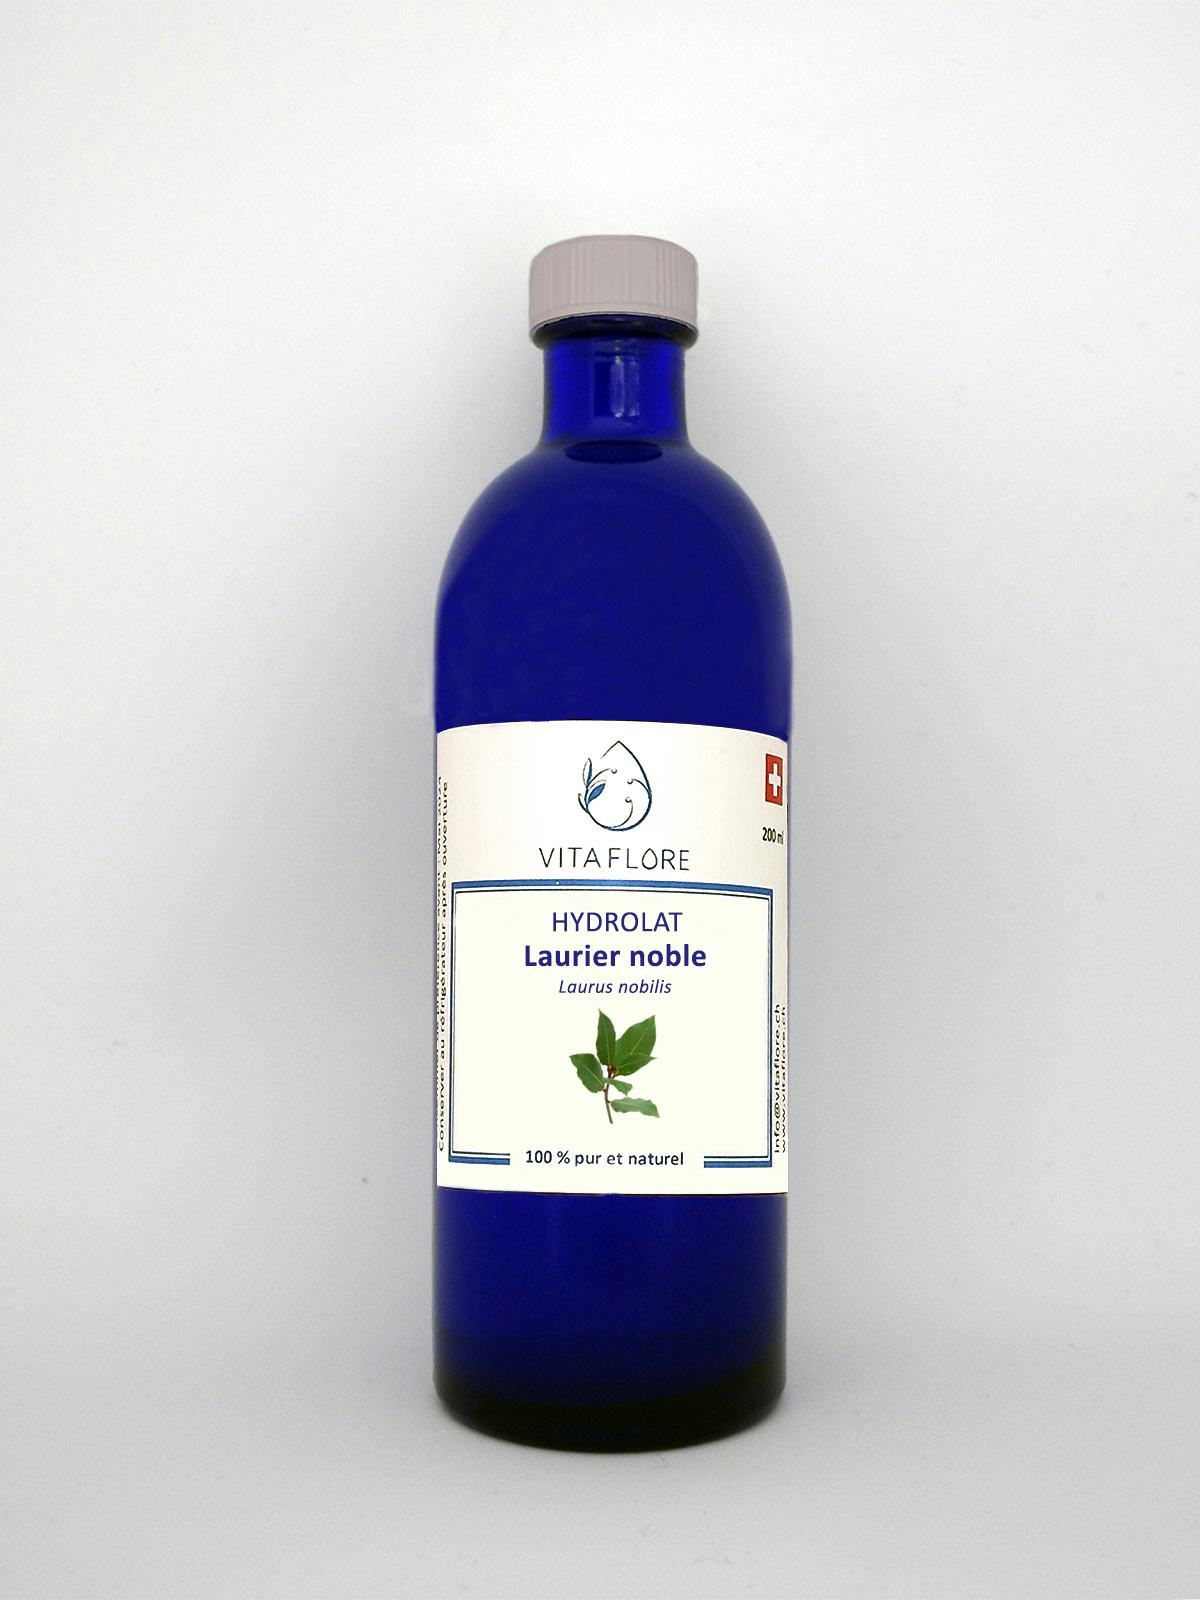 Hydrolat Laurier noble, artisanal product for direct sale in Switzerland